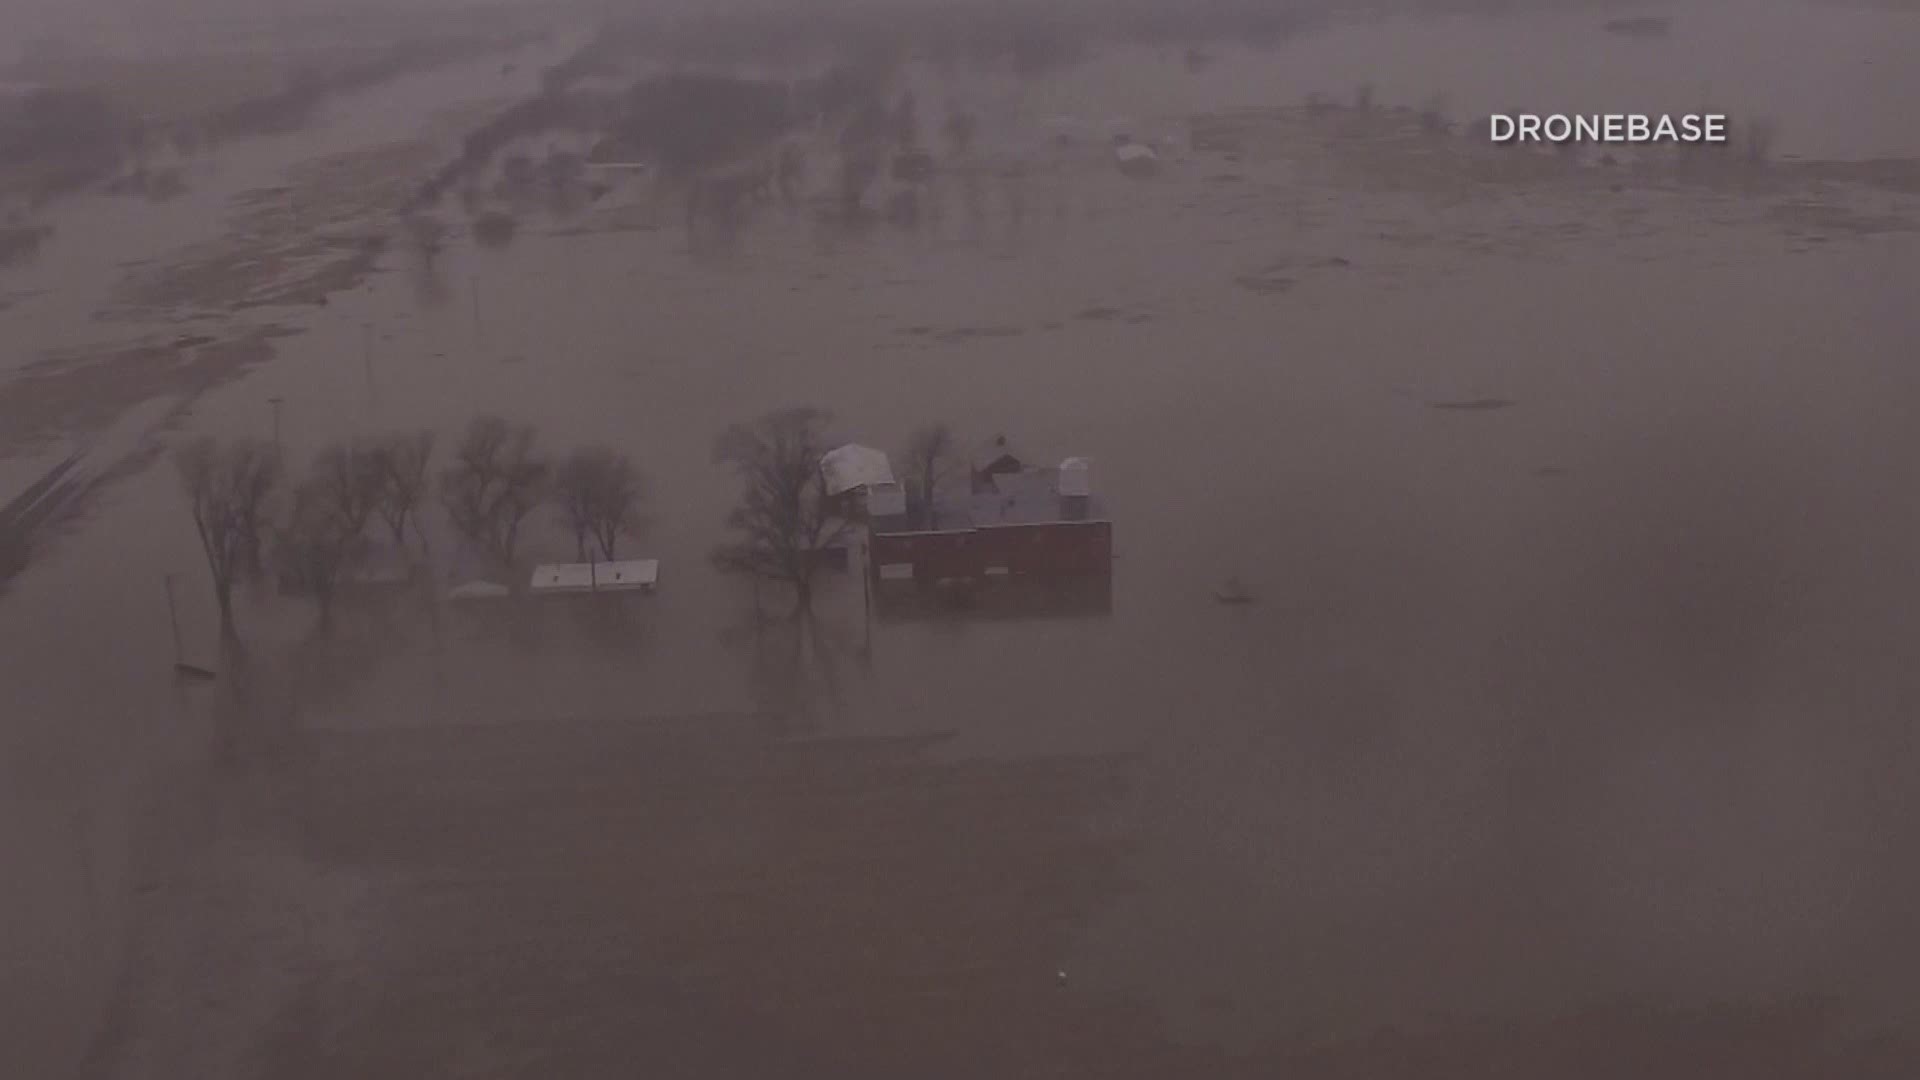 The flooding is expected to continue throughout the week in several states as high water flows down the Missouri River. (CREDIT: DRONEBASE - South of Omaha, Nebraska - 19 March 2019)